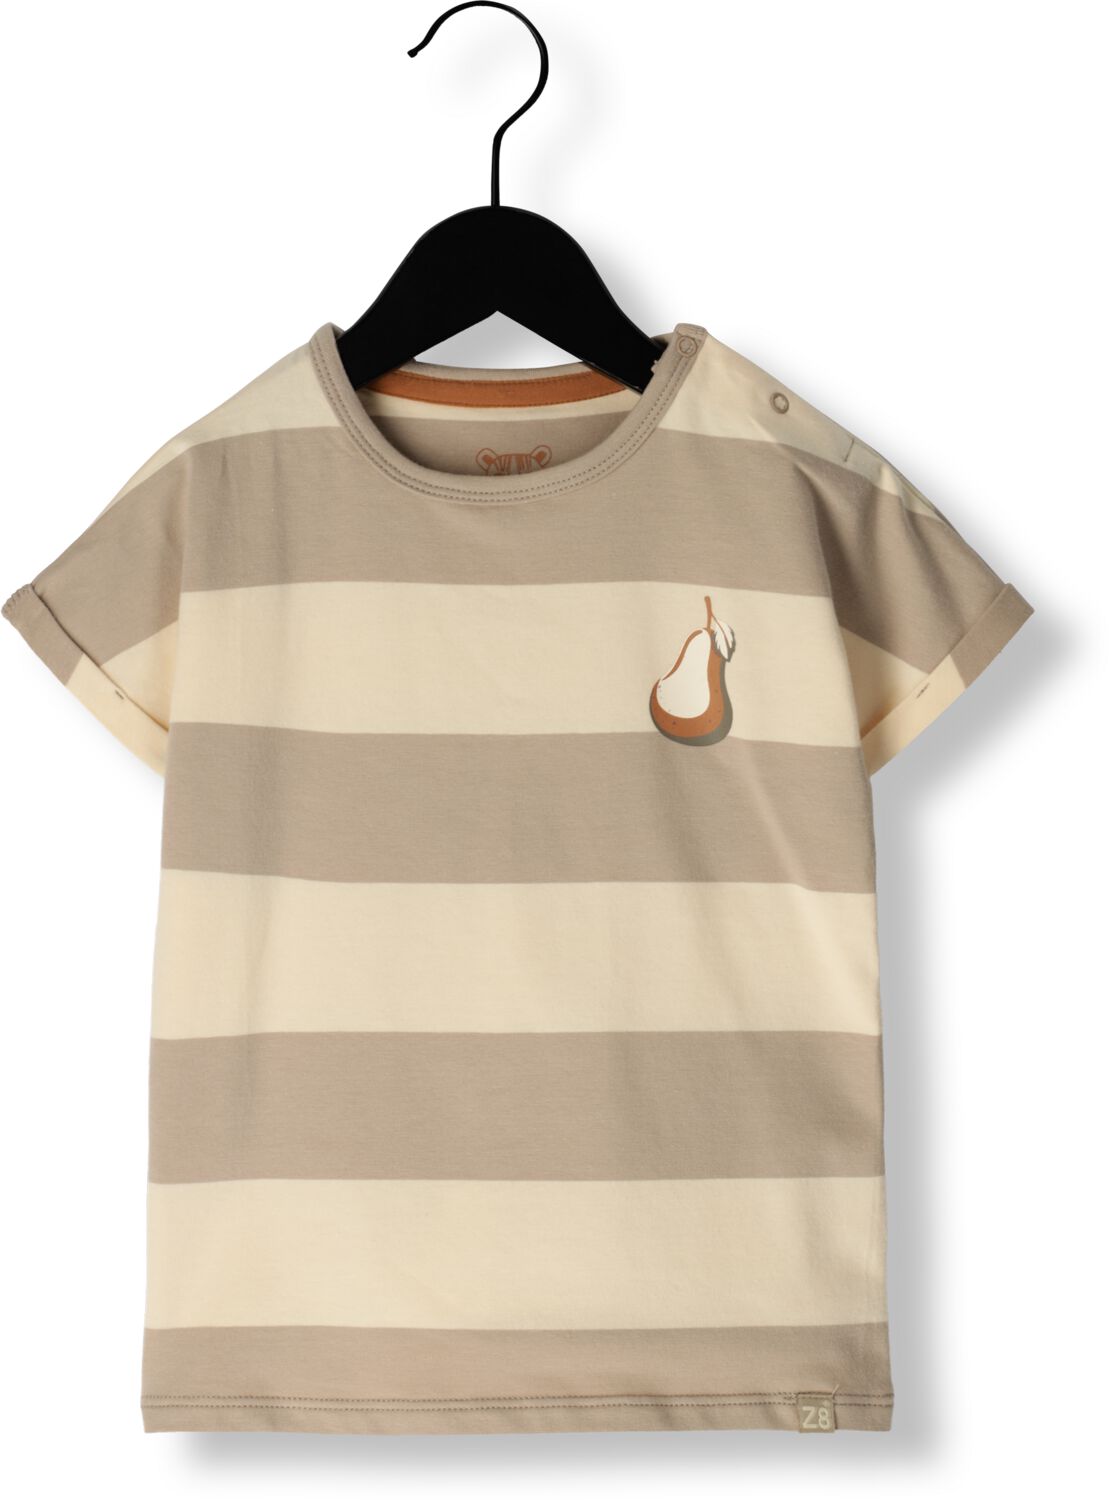 Z8 Baby Tops & T-shirts Cedro Beige